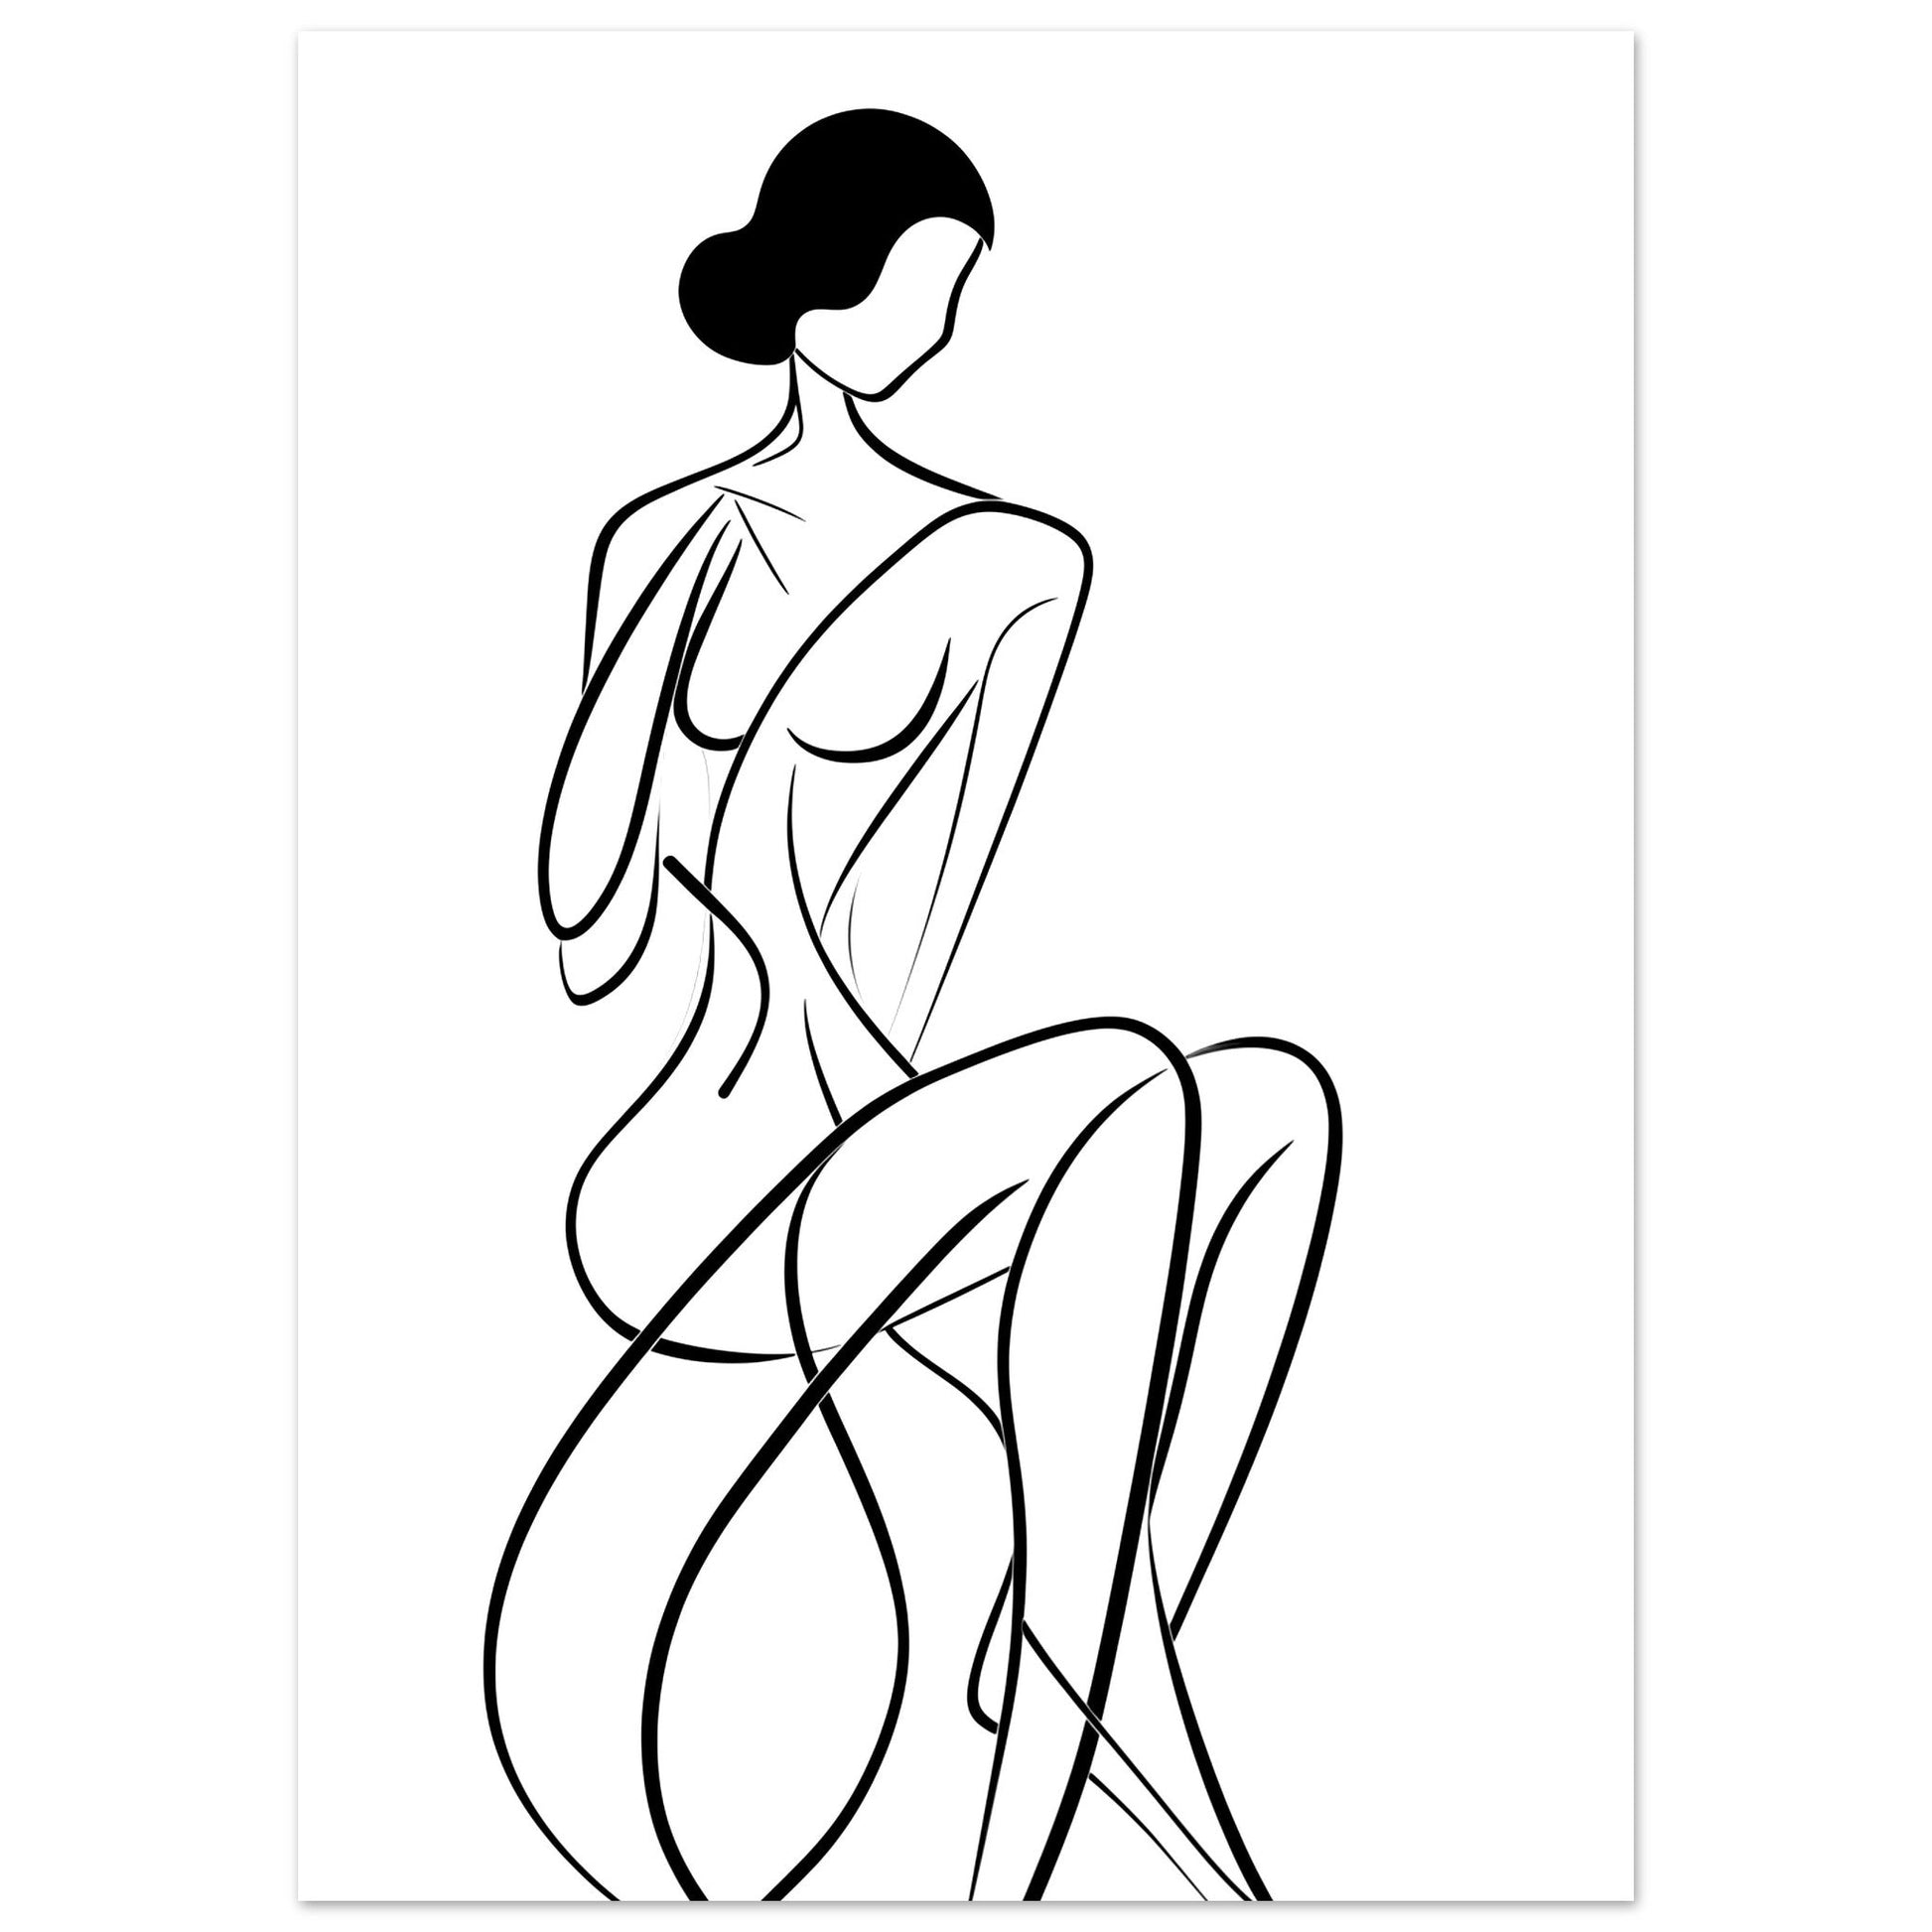 A black and white drawing of a woman sitting on a chair, perfect for adding some artistic flair to your room's Elegance in Contours wall decor.